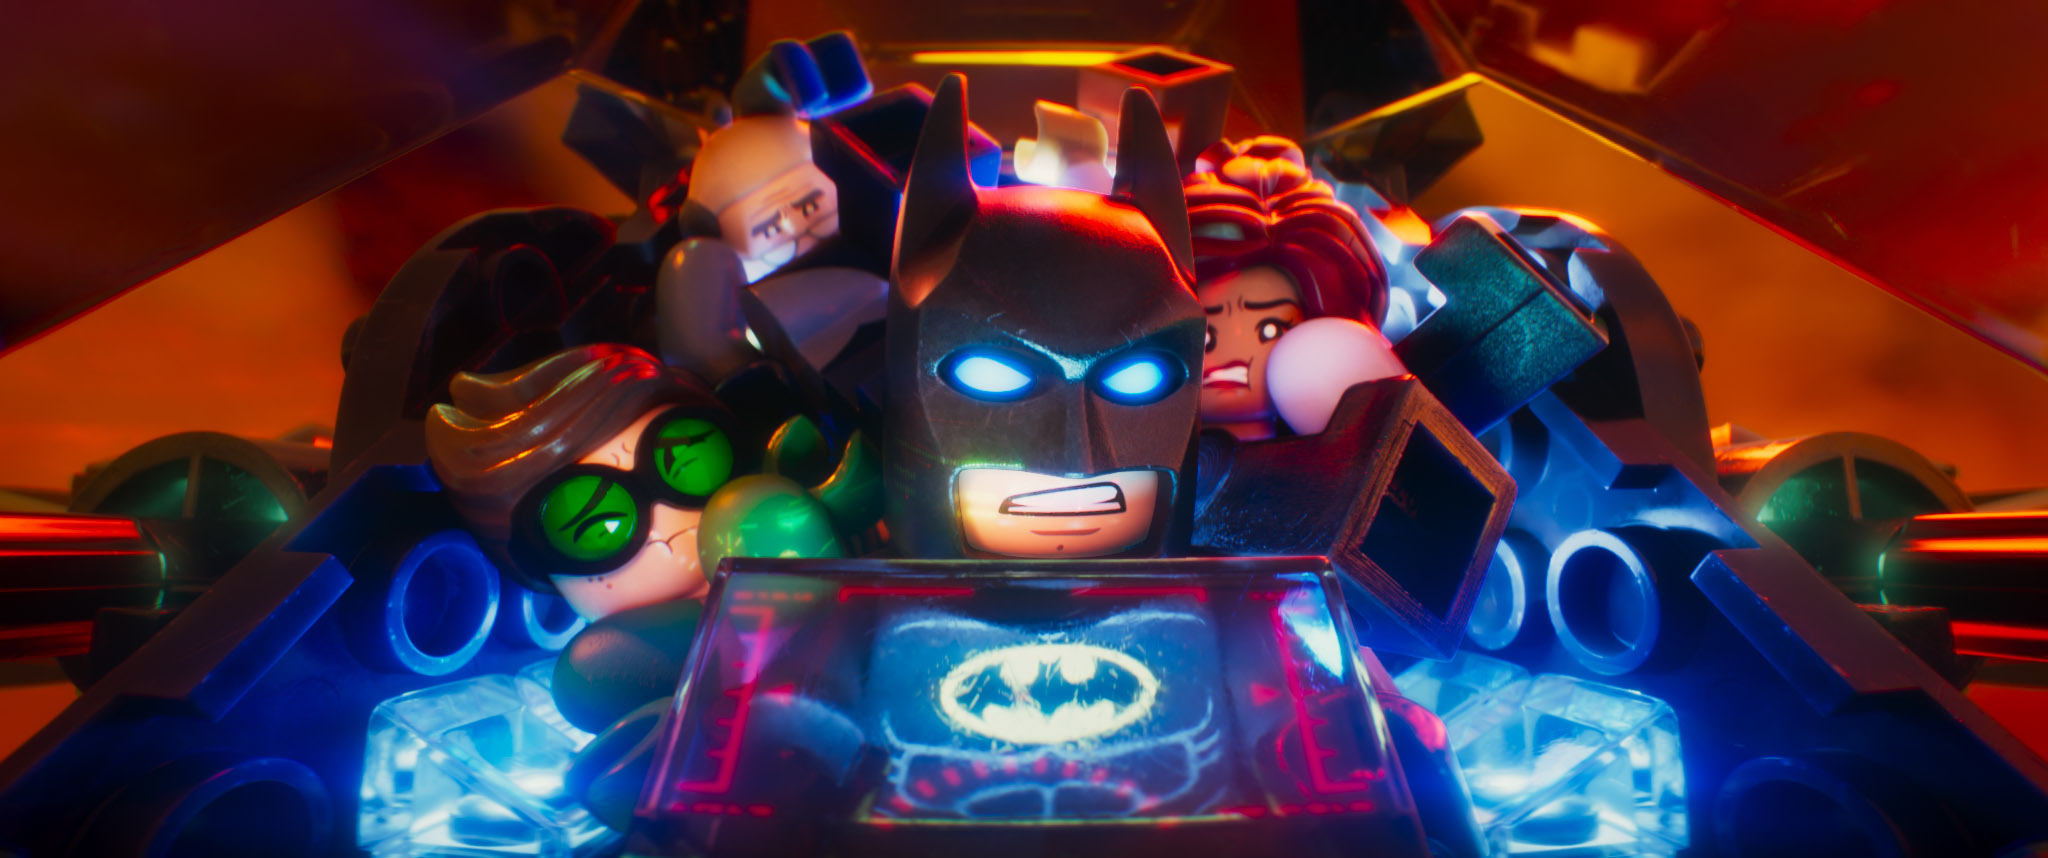 The Lego Batman Movie' Beats 'Fist Fight' For The Weekend [Box Office]